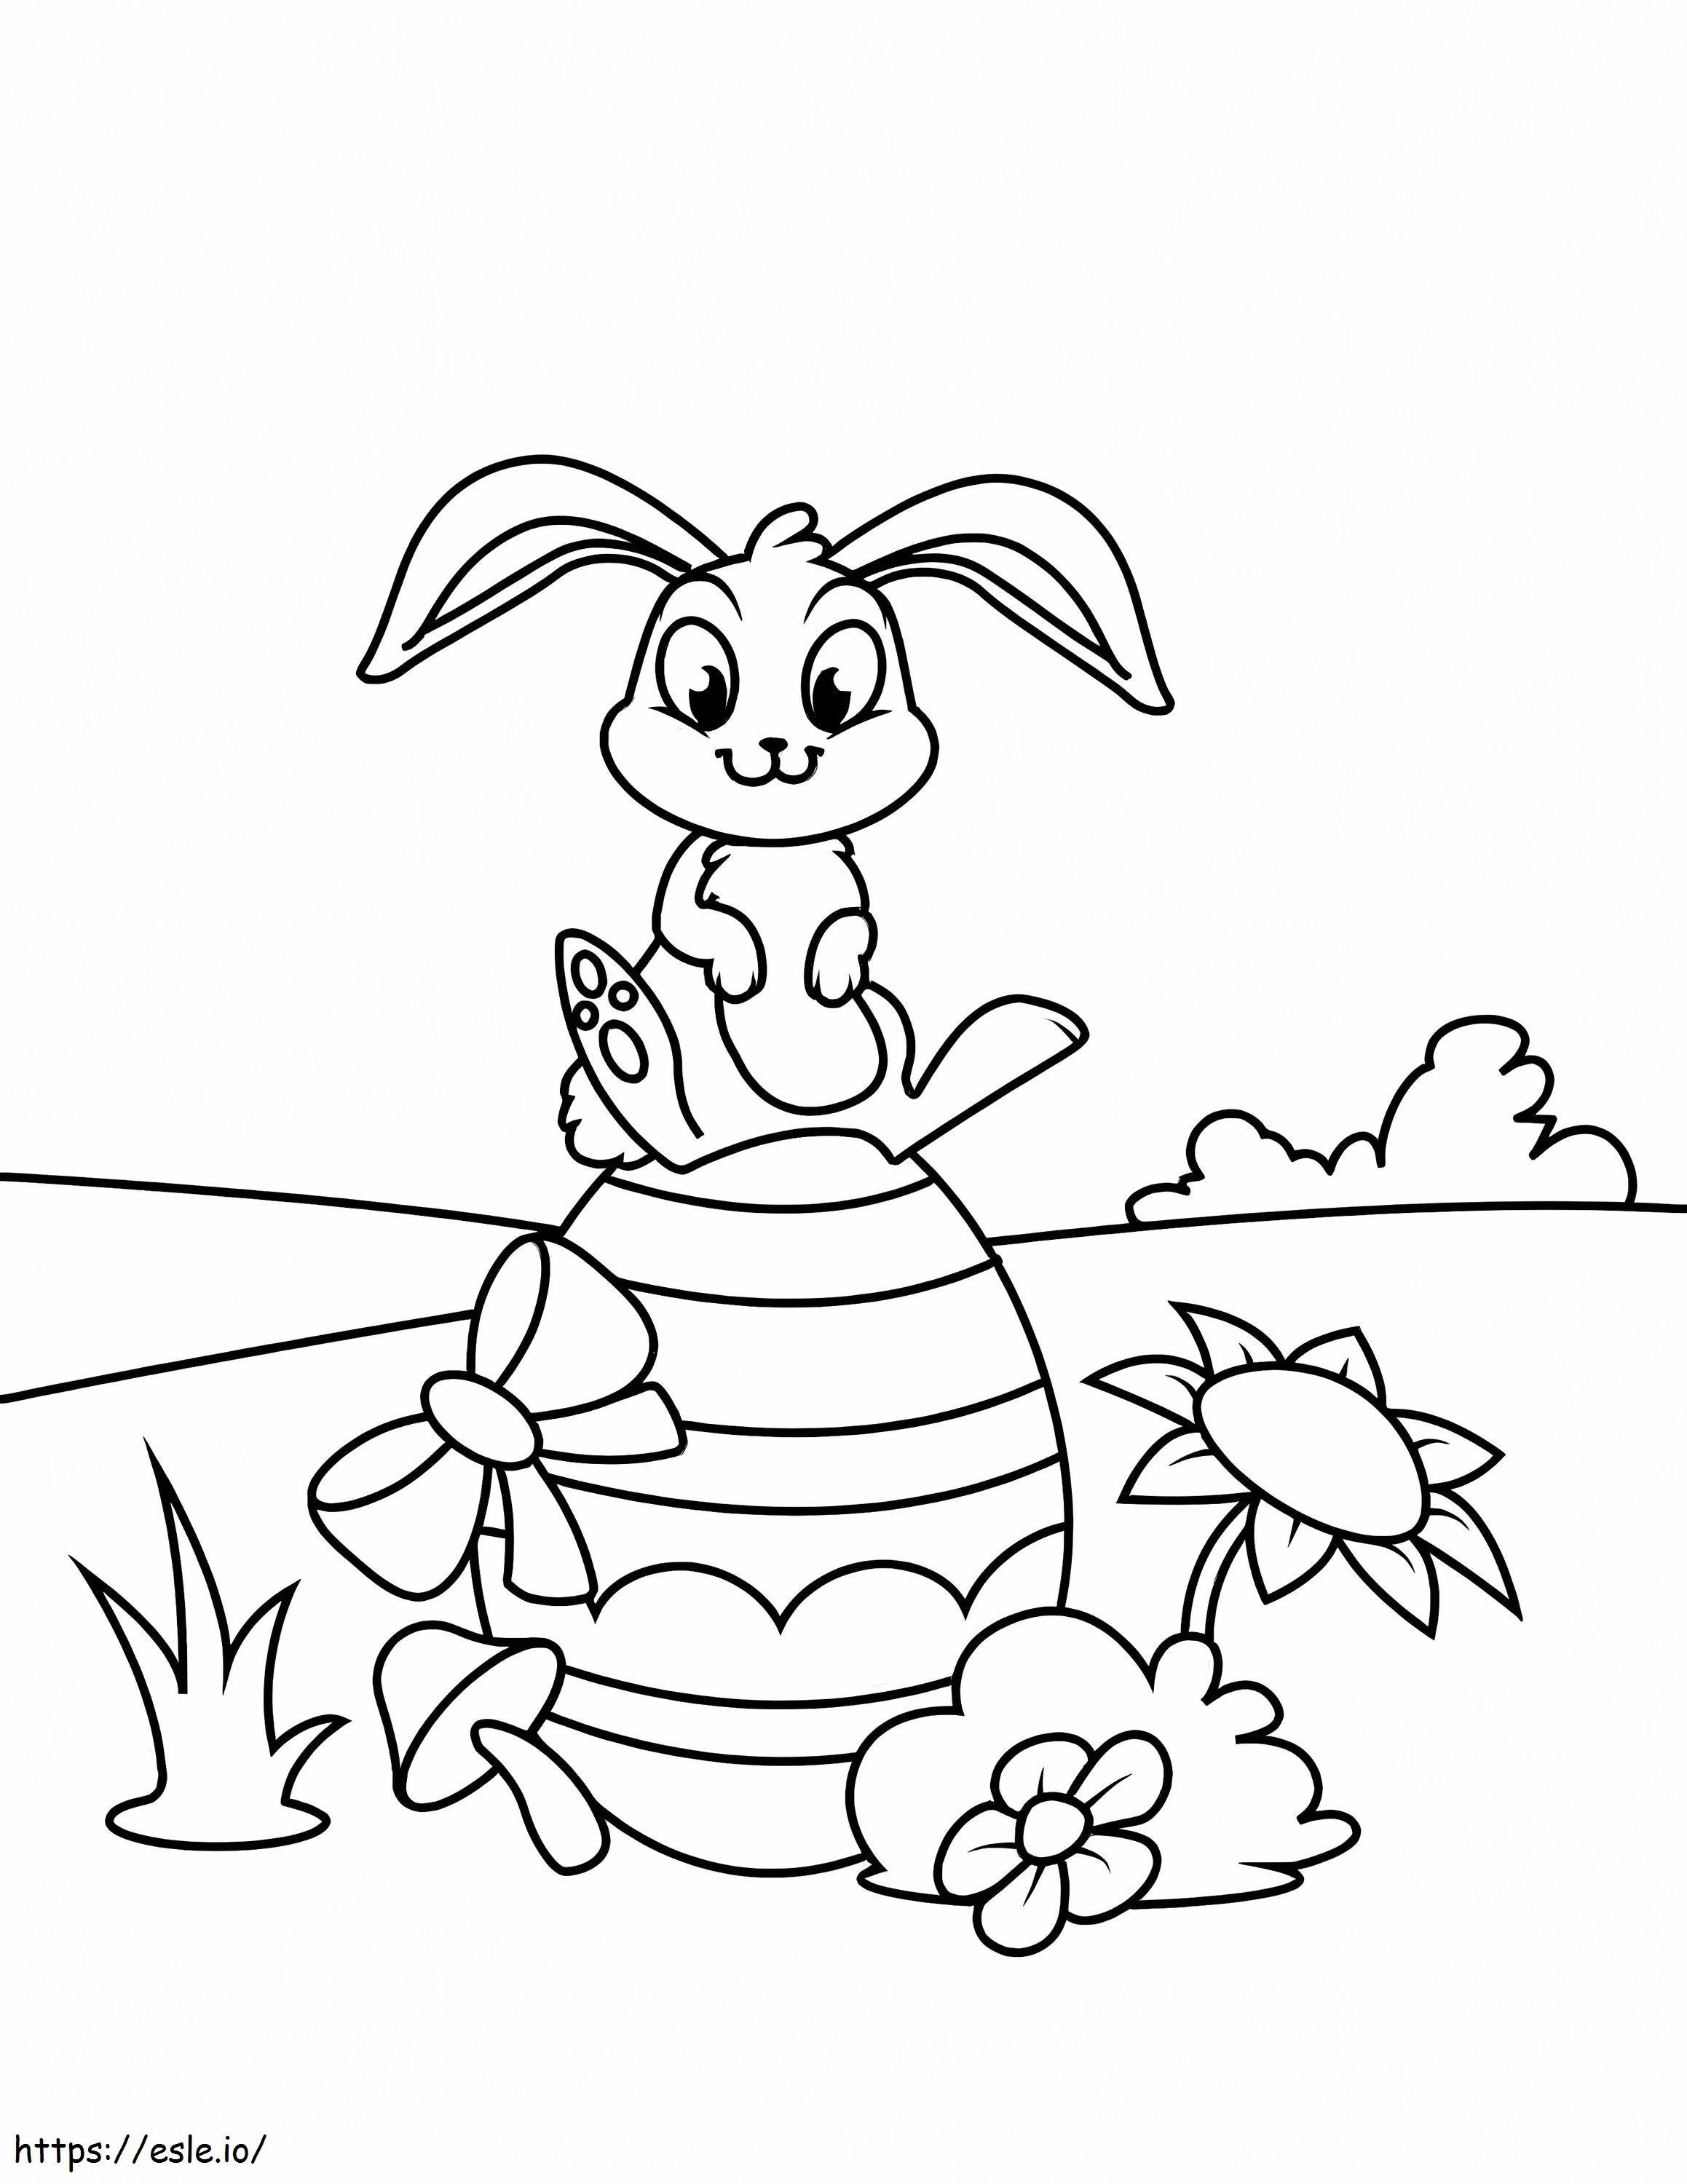 Easter Bunny And Big Egg coloring page